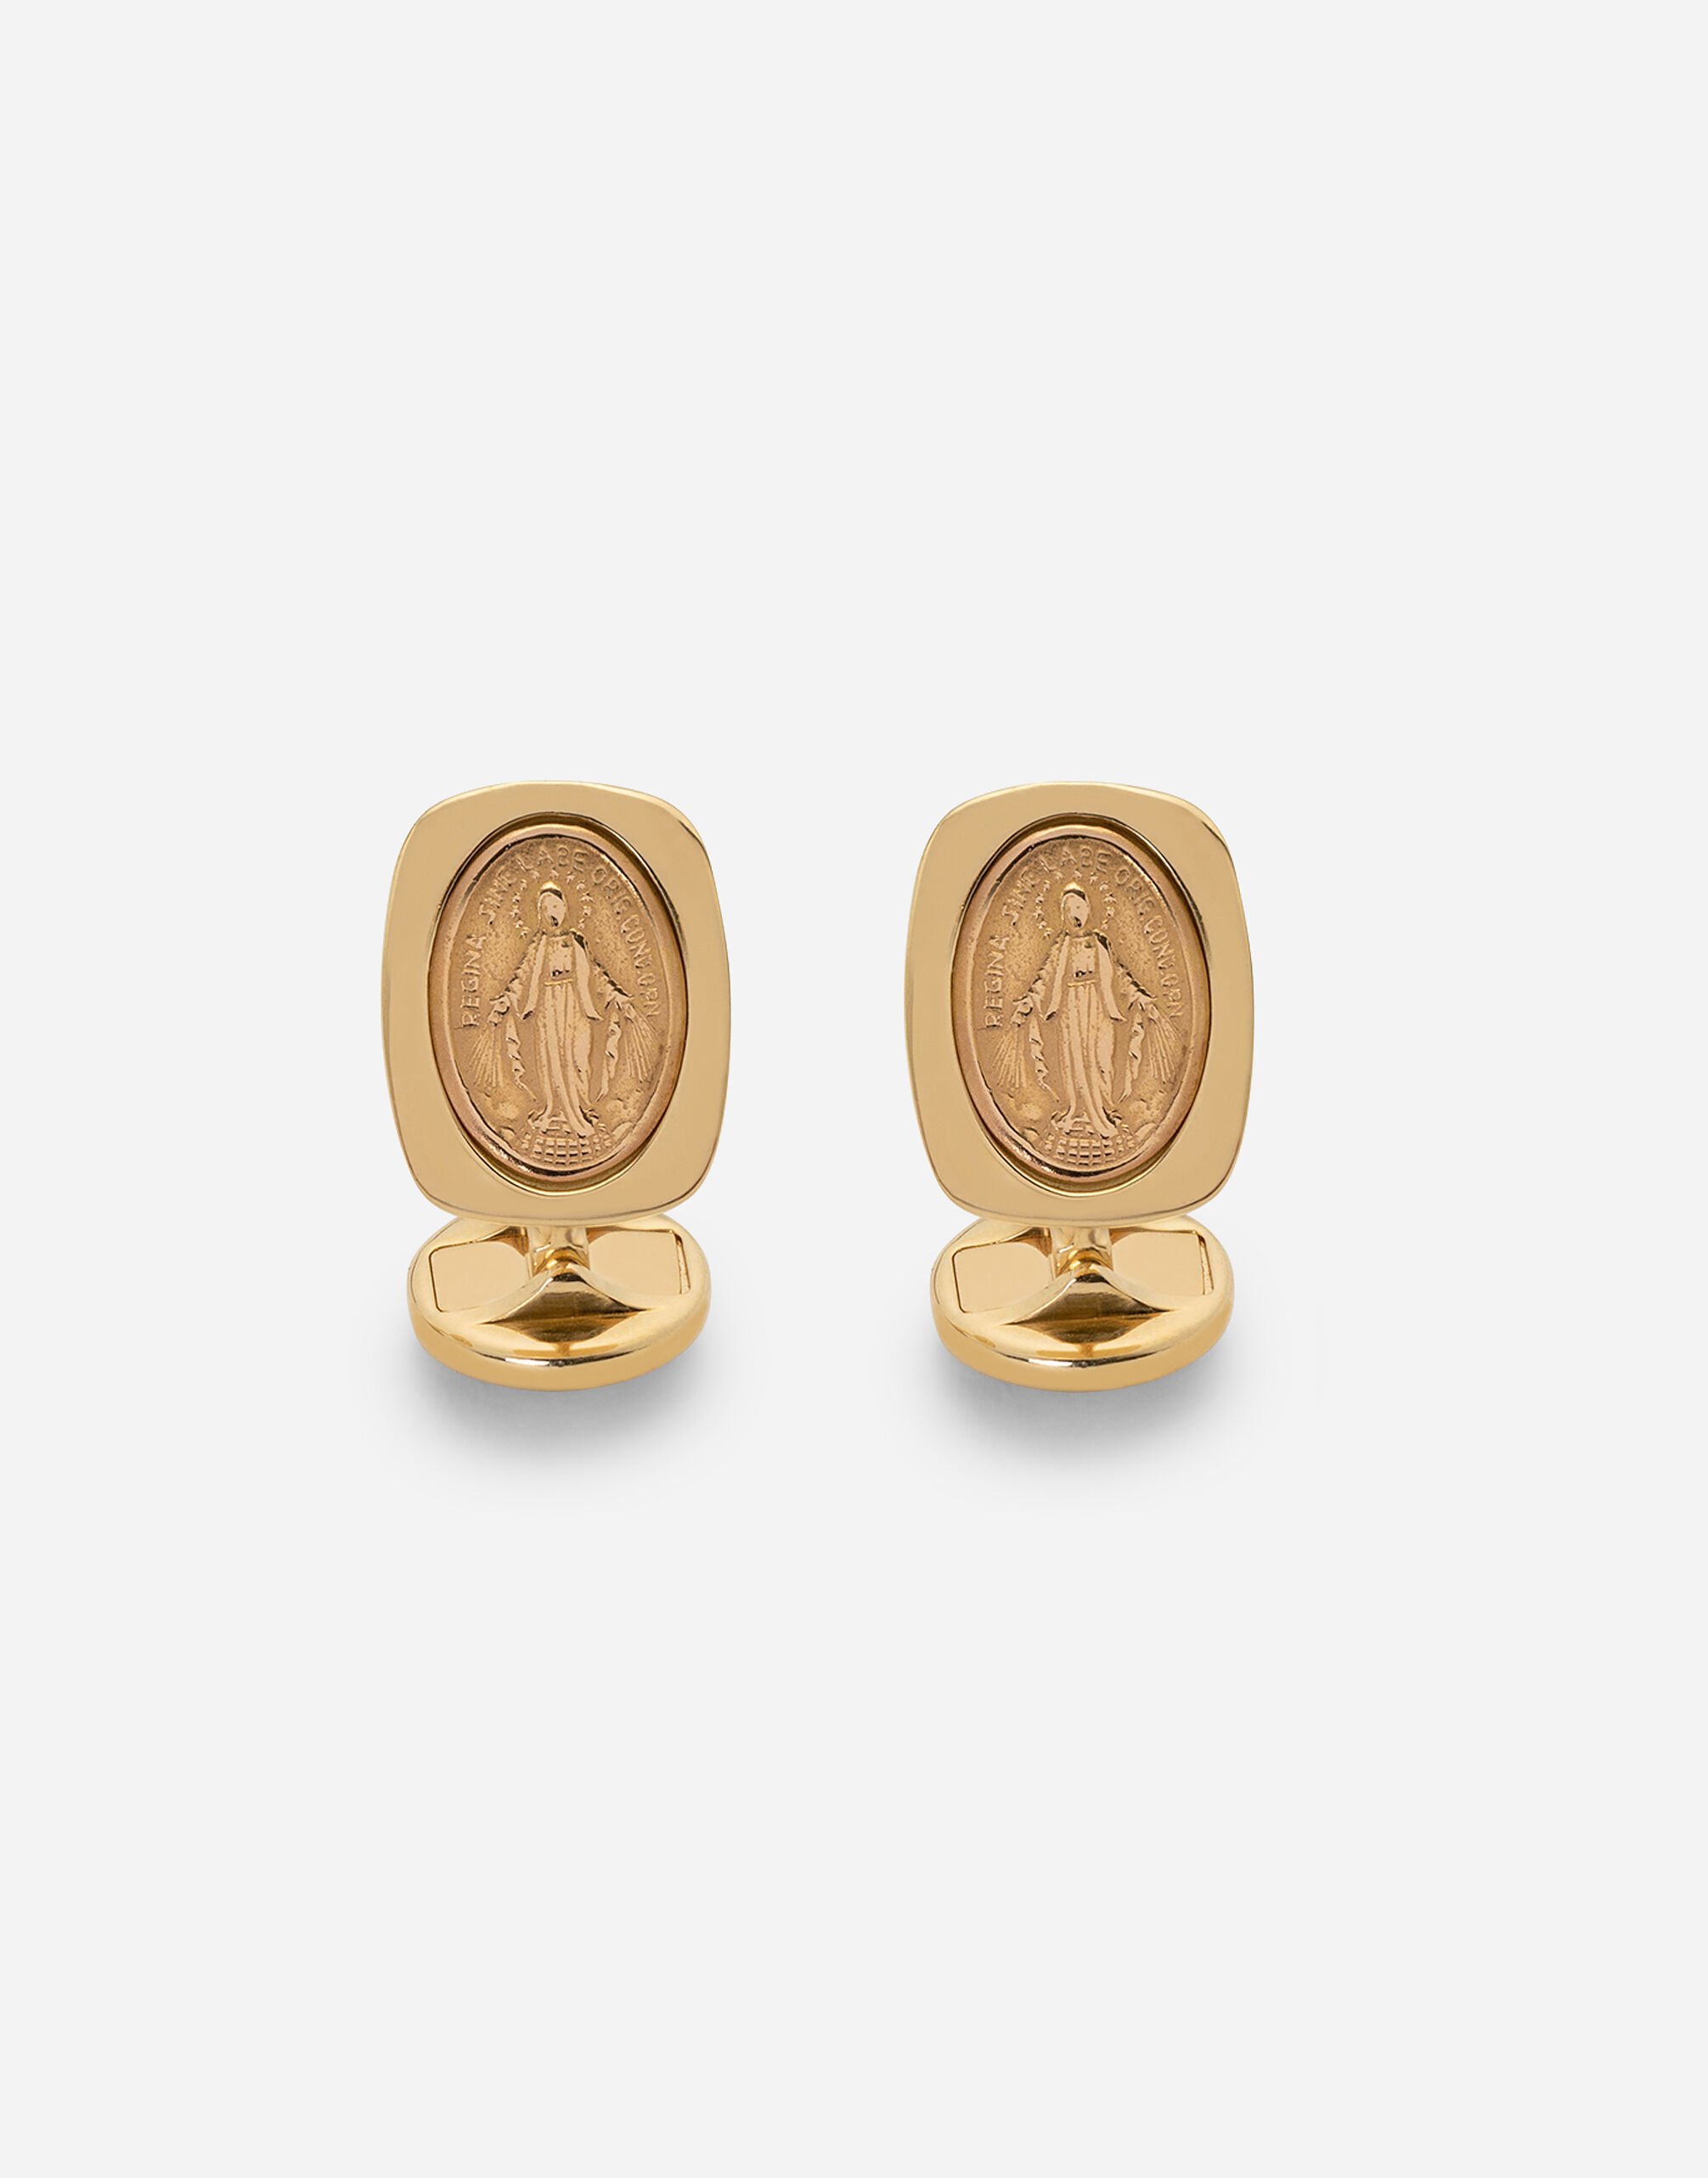 Dolce & Gabbana Devotion yellow gold cufflinks with a red gold Virgin Mary medallion Gold and shiny black VG2277VM287